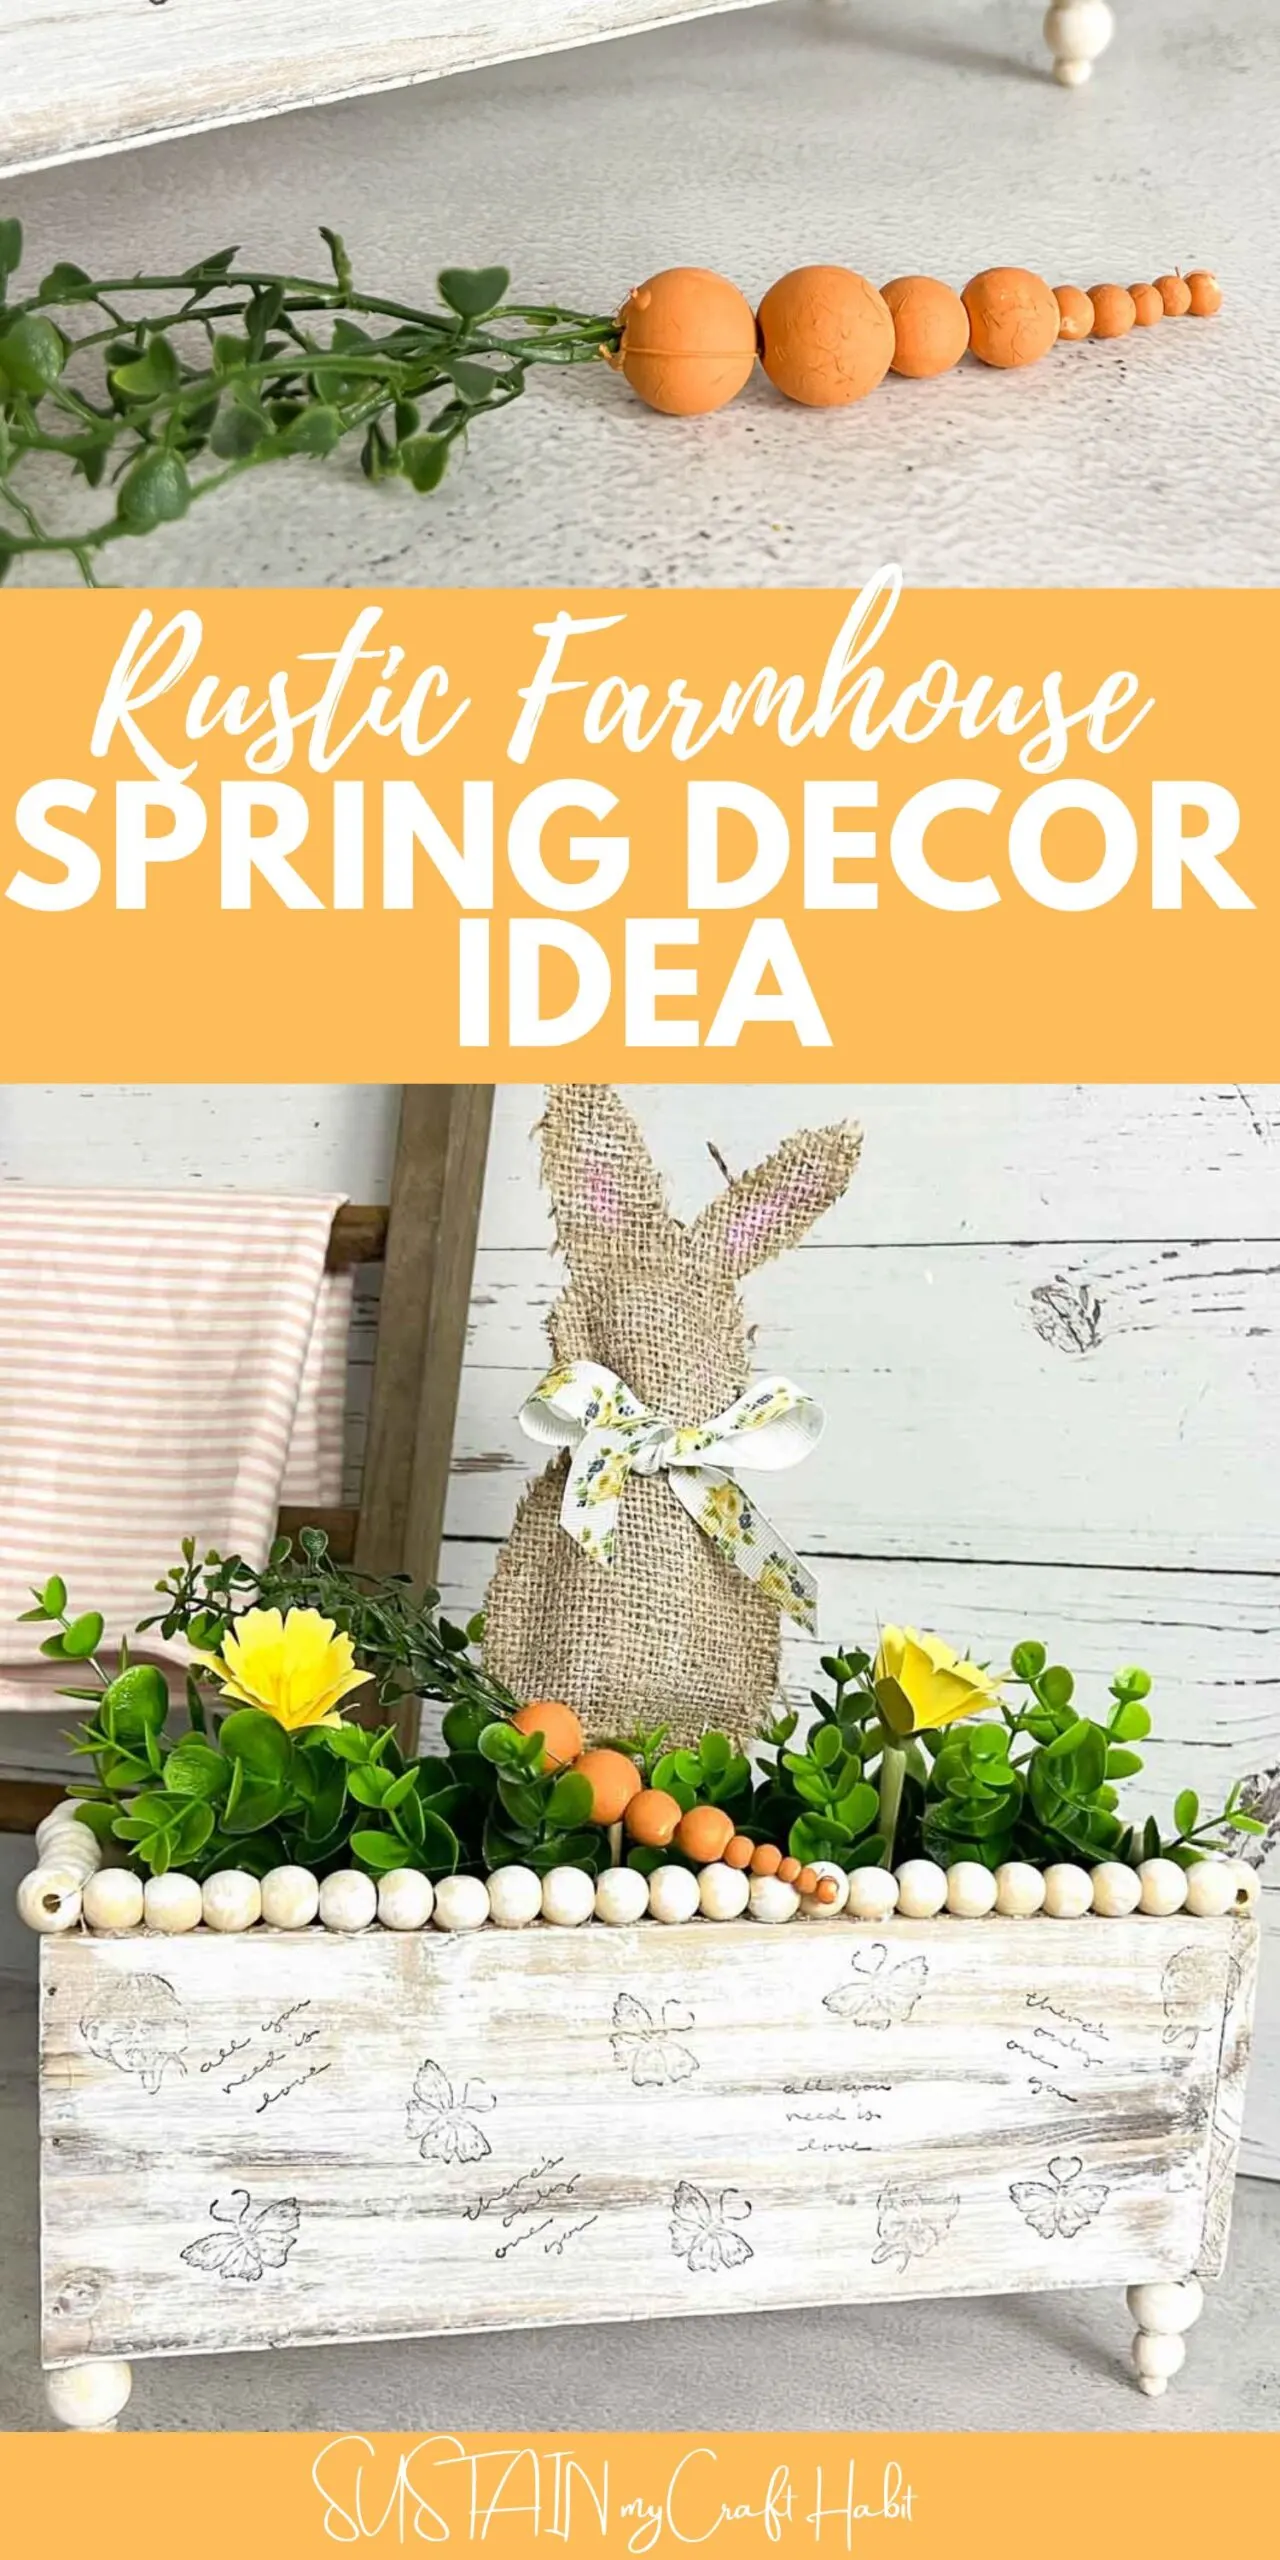 Collage with text overlay showing farmhouse spring decor with a burlap bunny, faux greenery and wood bead carrots.